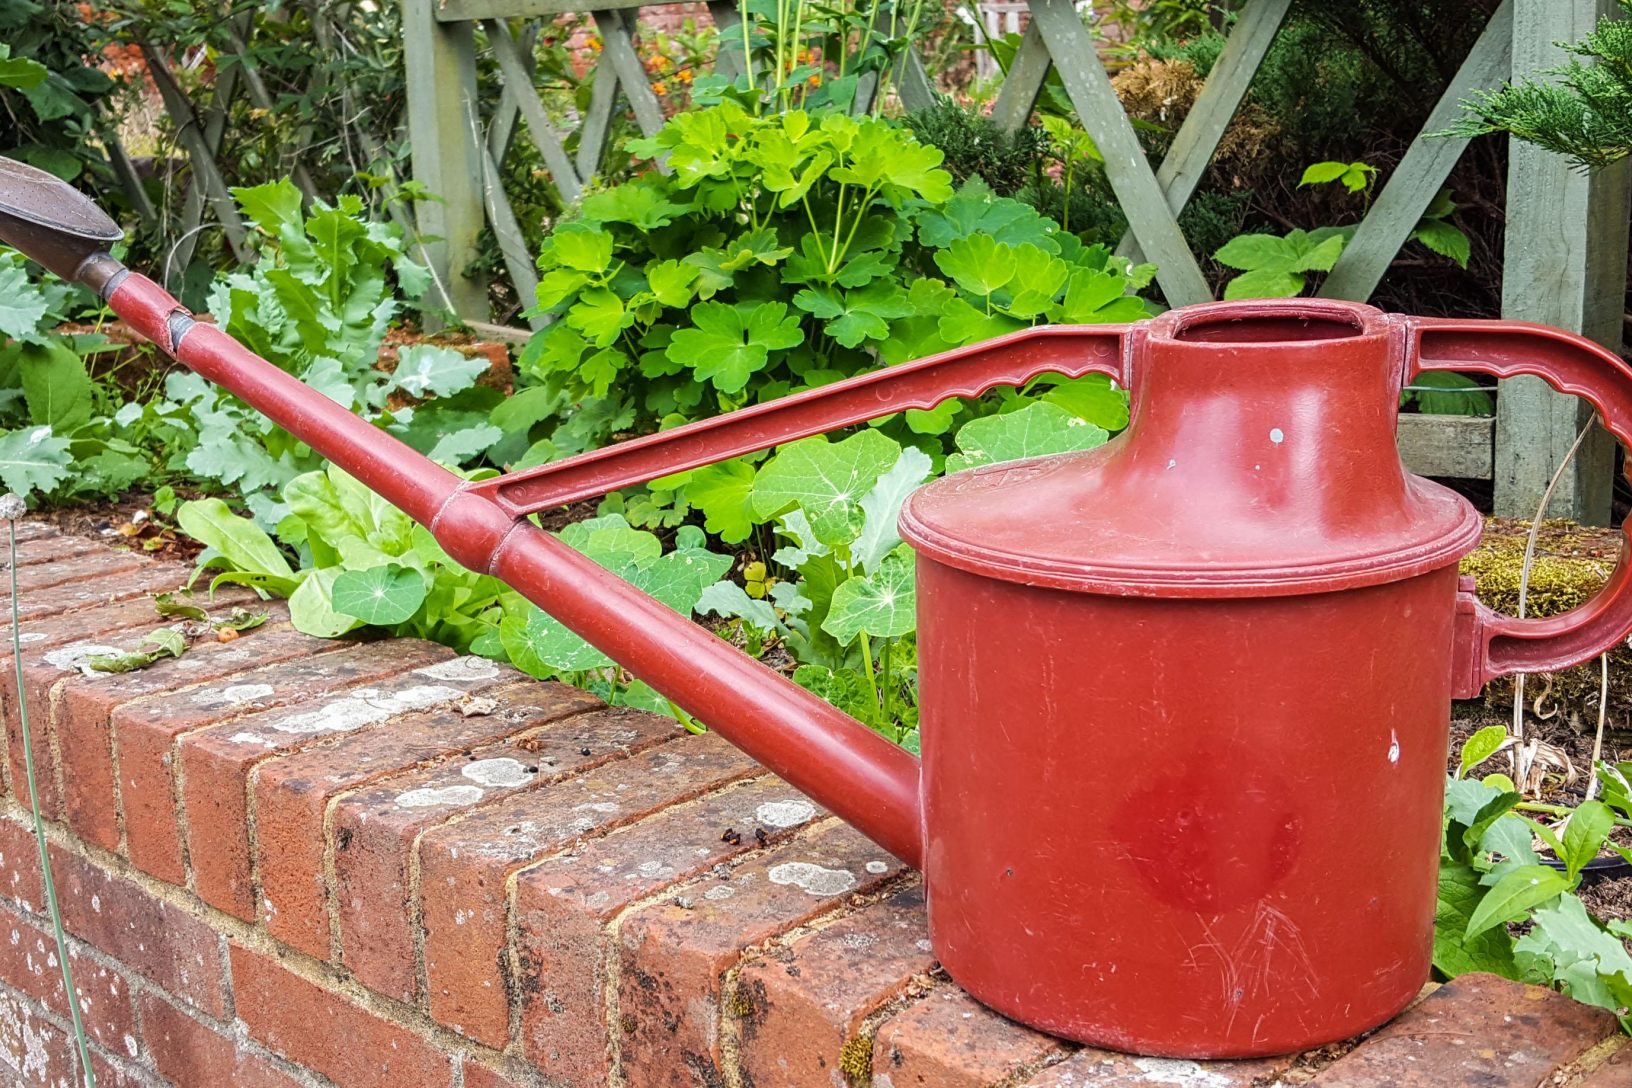 Watering can 1